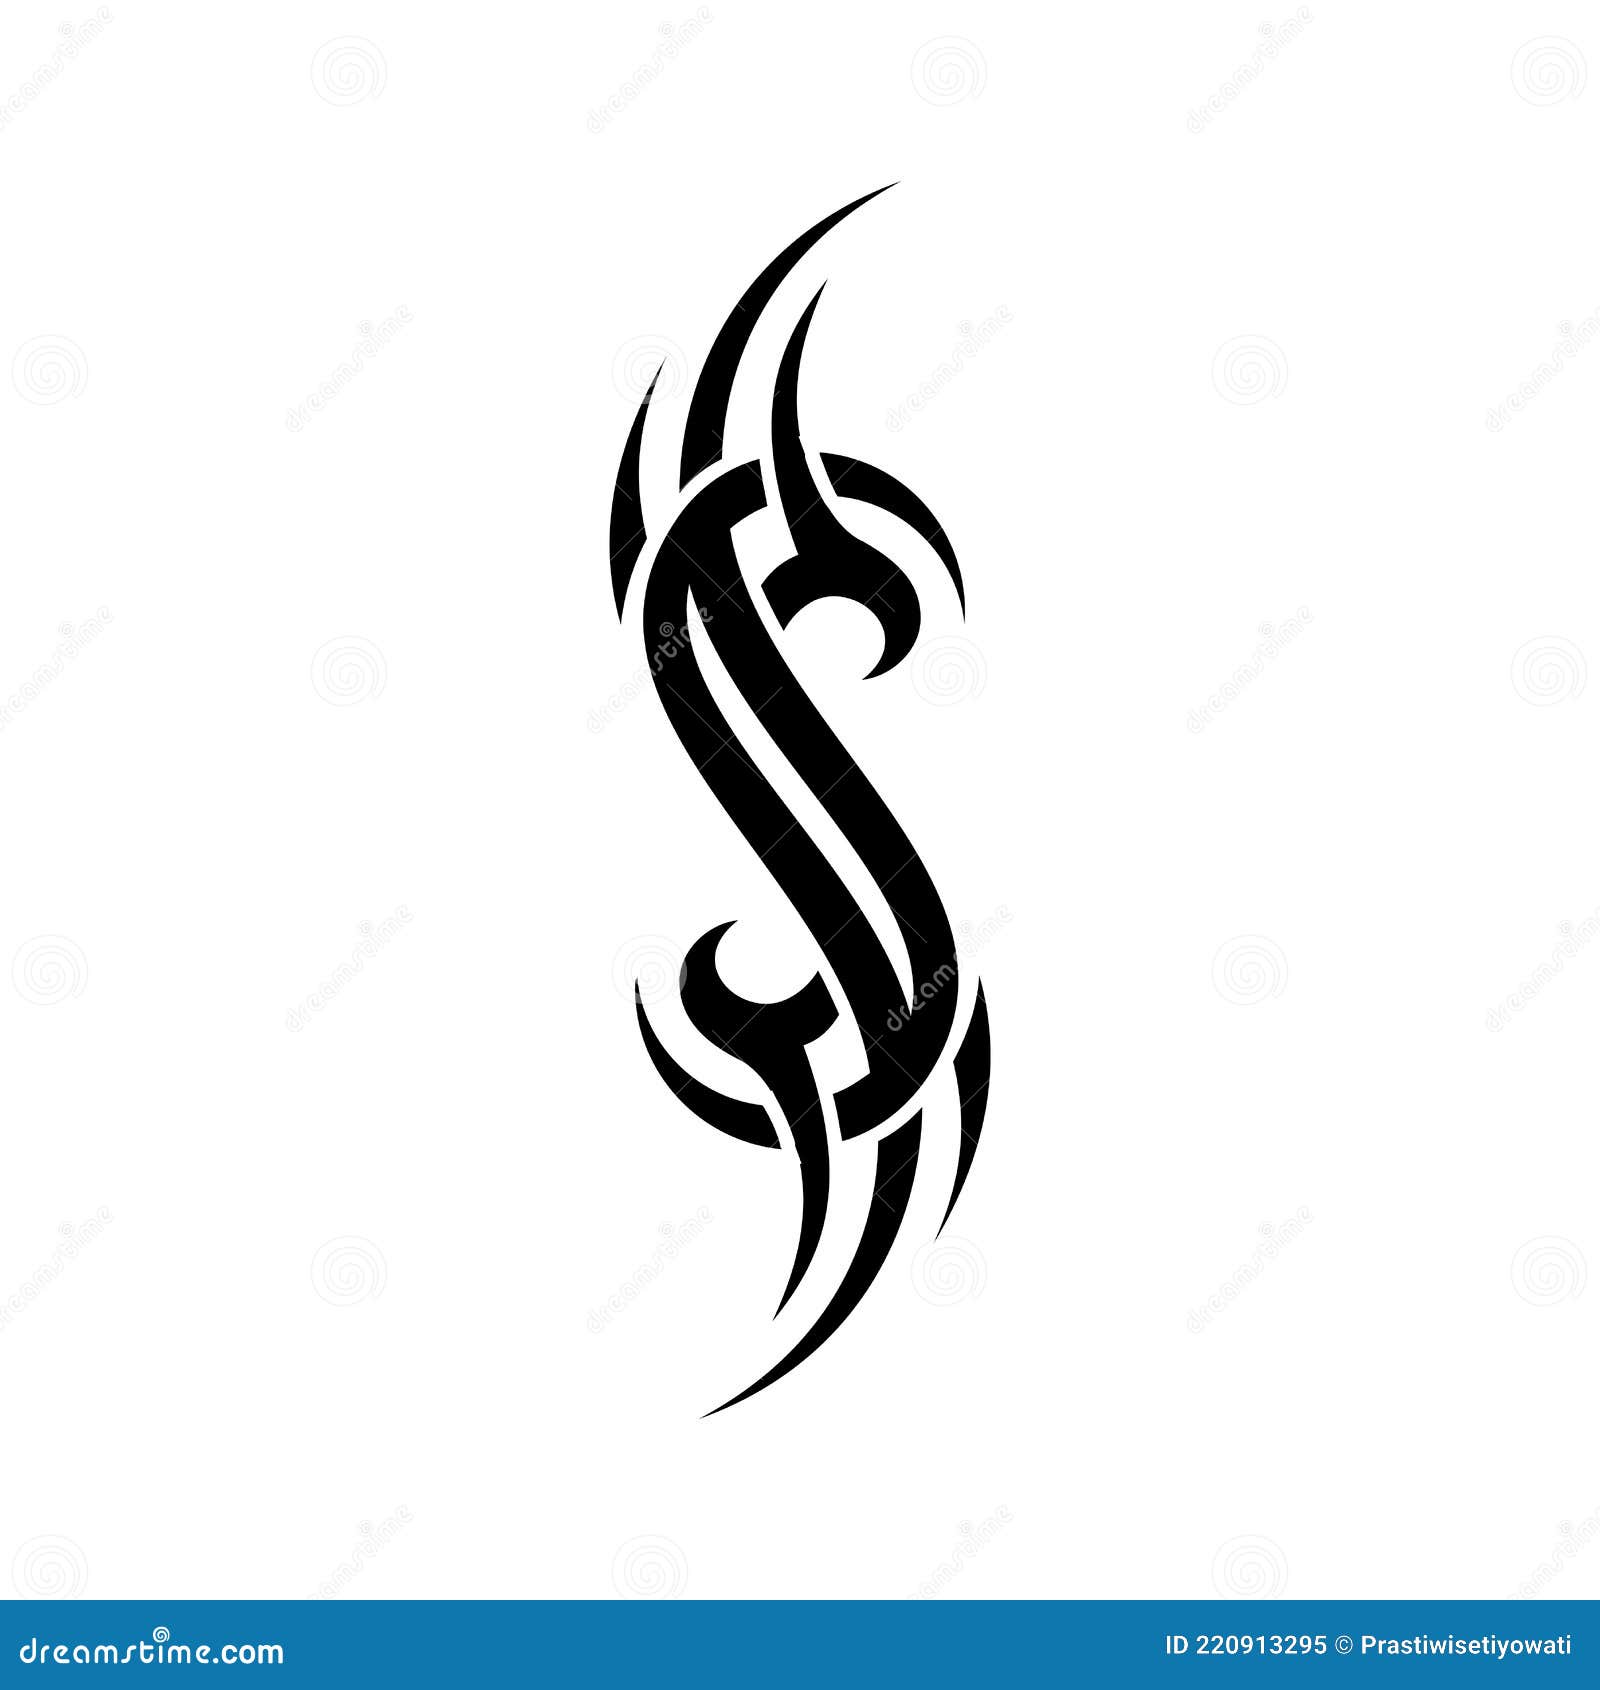 Letter S Tribal Tattoo Icon Stock Vector - Illustration of sketch, symbol:  220913295